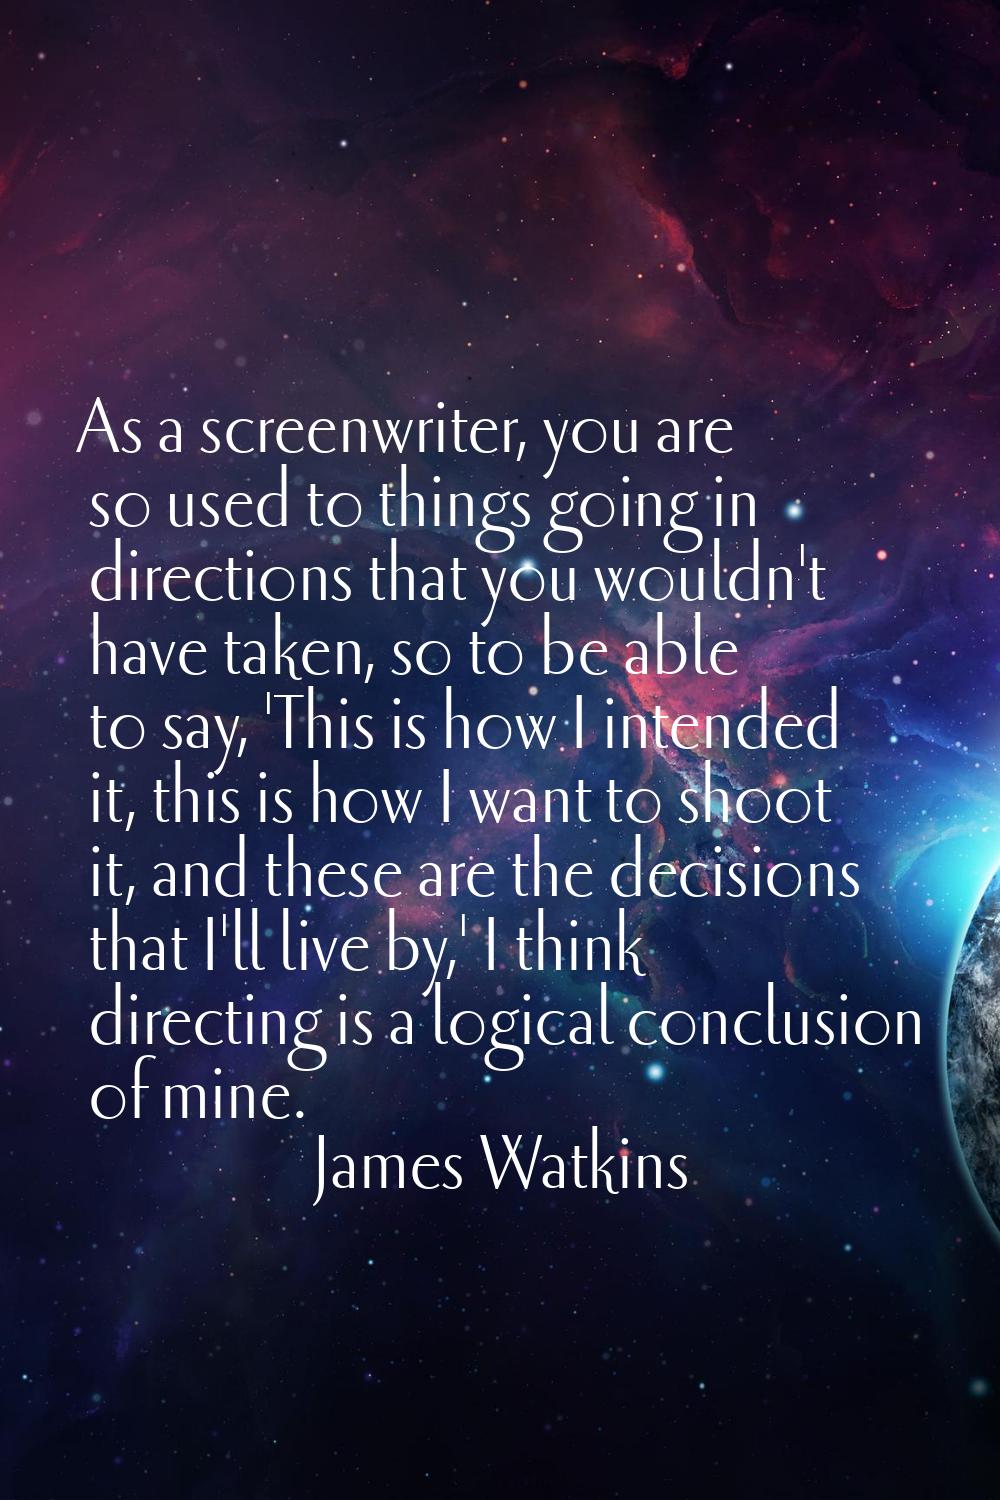 As a screenwriter, you are so used to things going in directions that you wouldn't have taken, so t